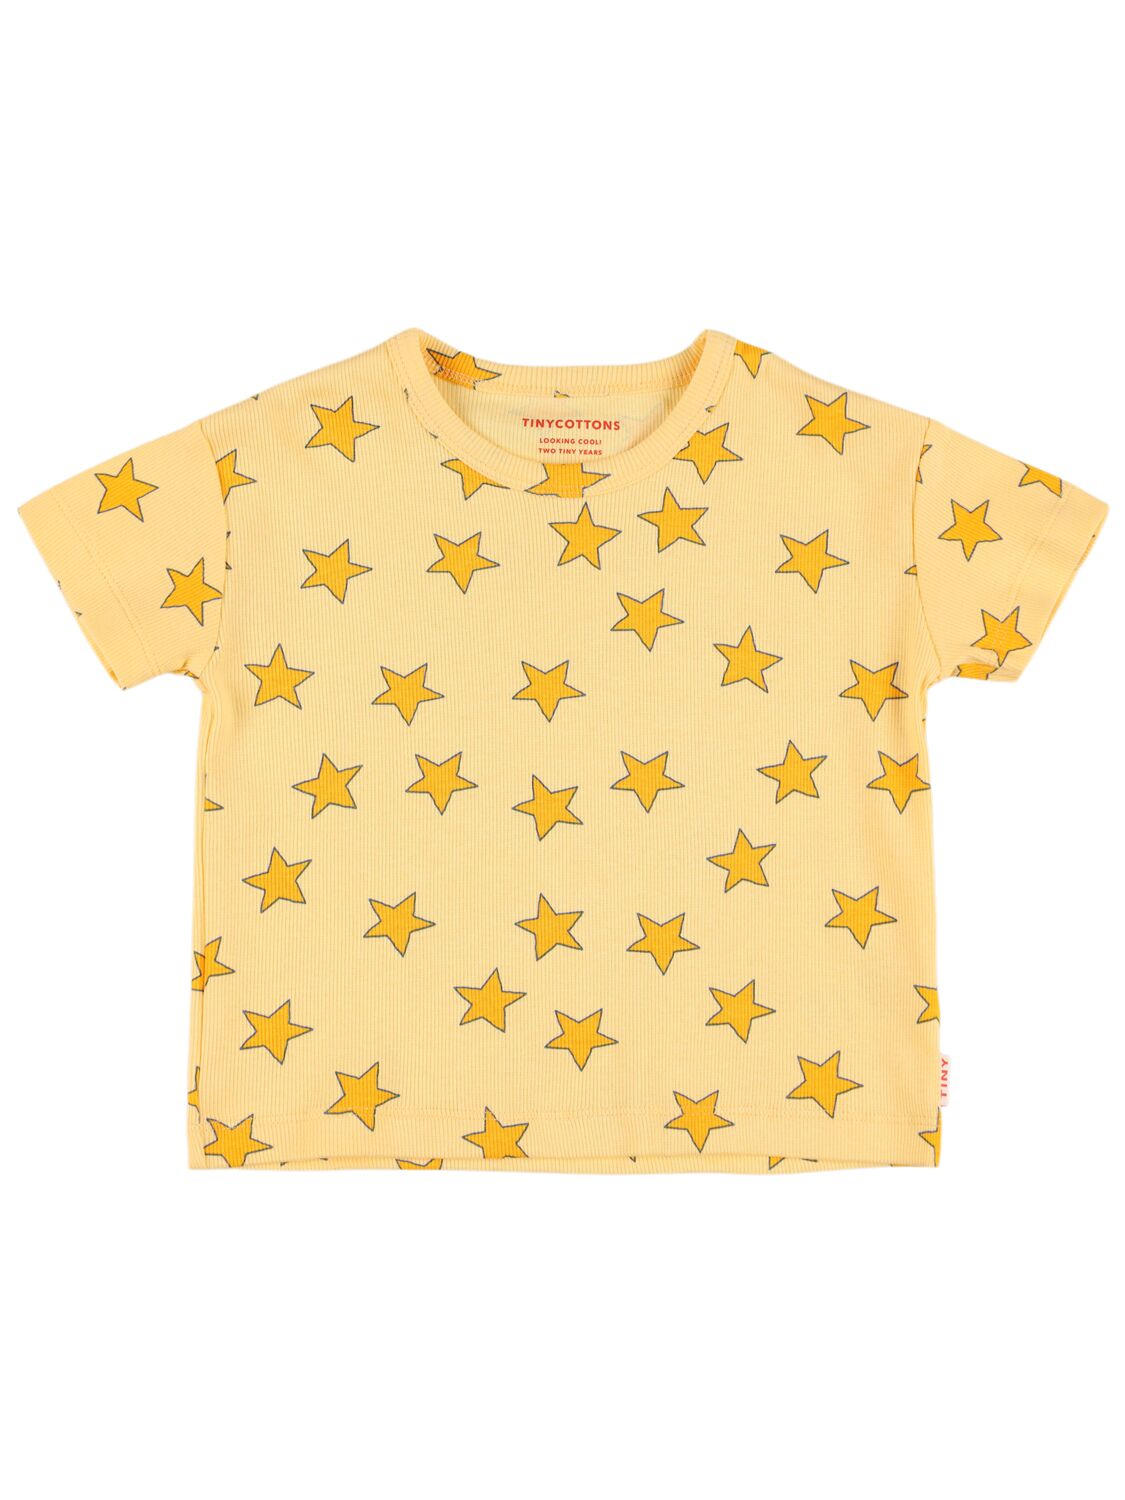 Tiny Cottons Kids' 星星印花比马棉t恤 In Yellow